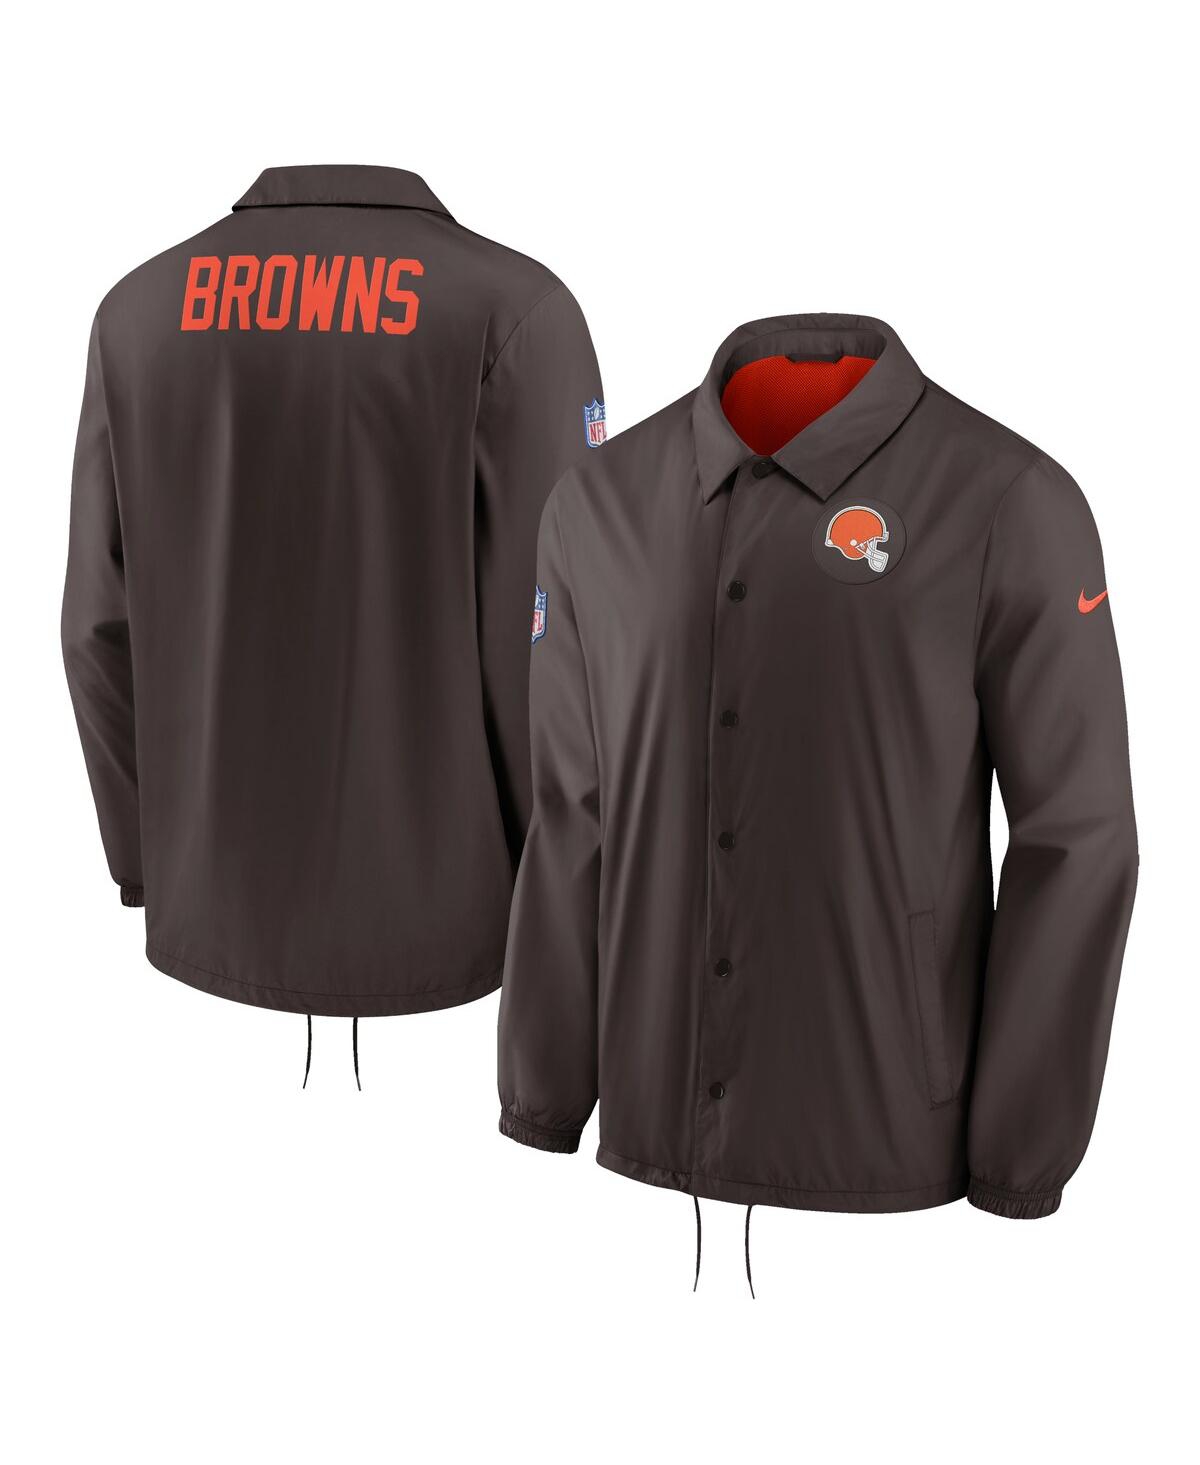 NIKE MEN'S NIKE BROWN CLEVELAND BROWNS SIDELINE COACHES FULL-SNAP JACKET